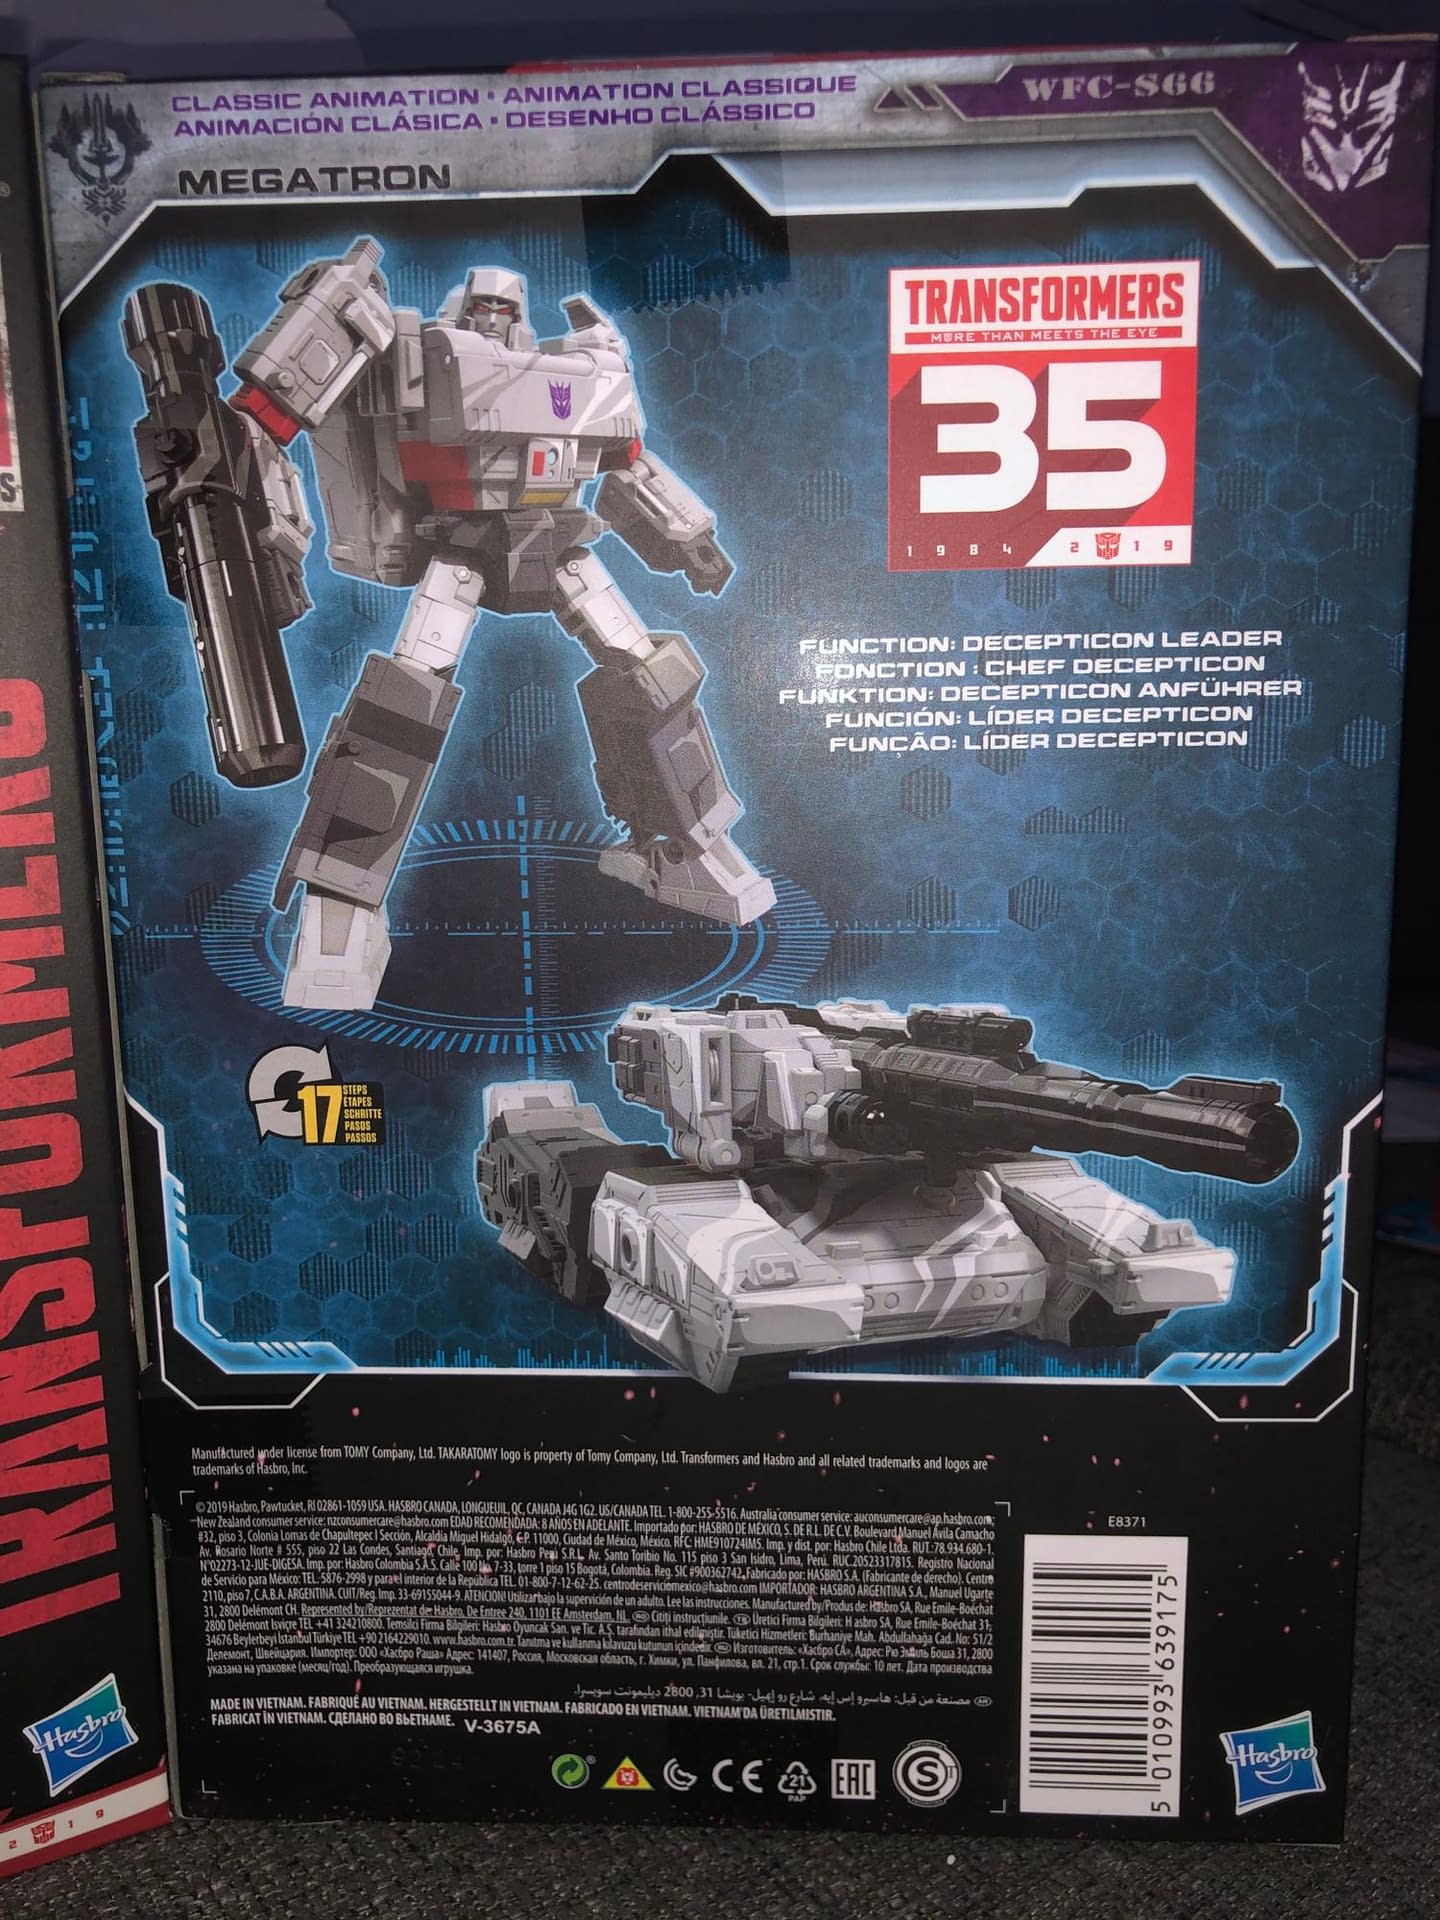 Transformers Holiday Guide Thats More Than Meets the Eye